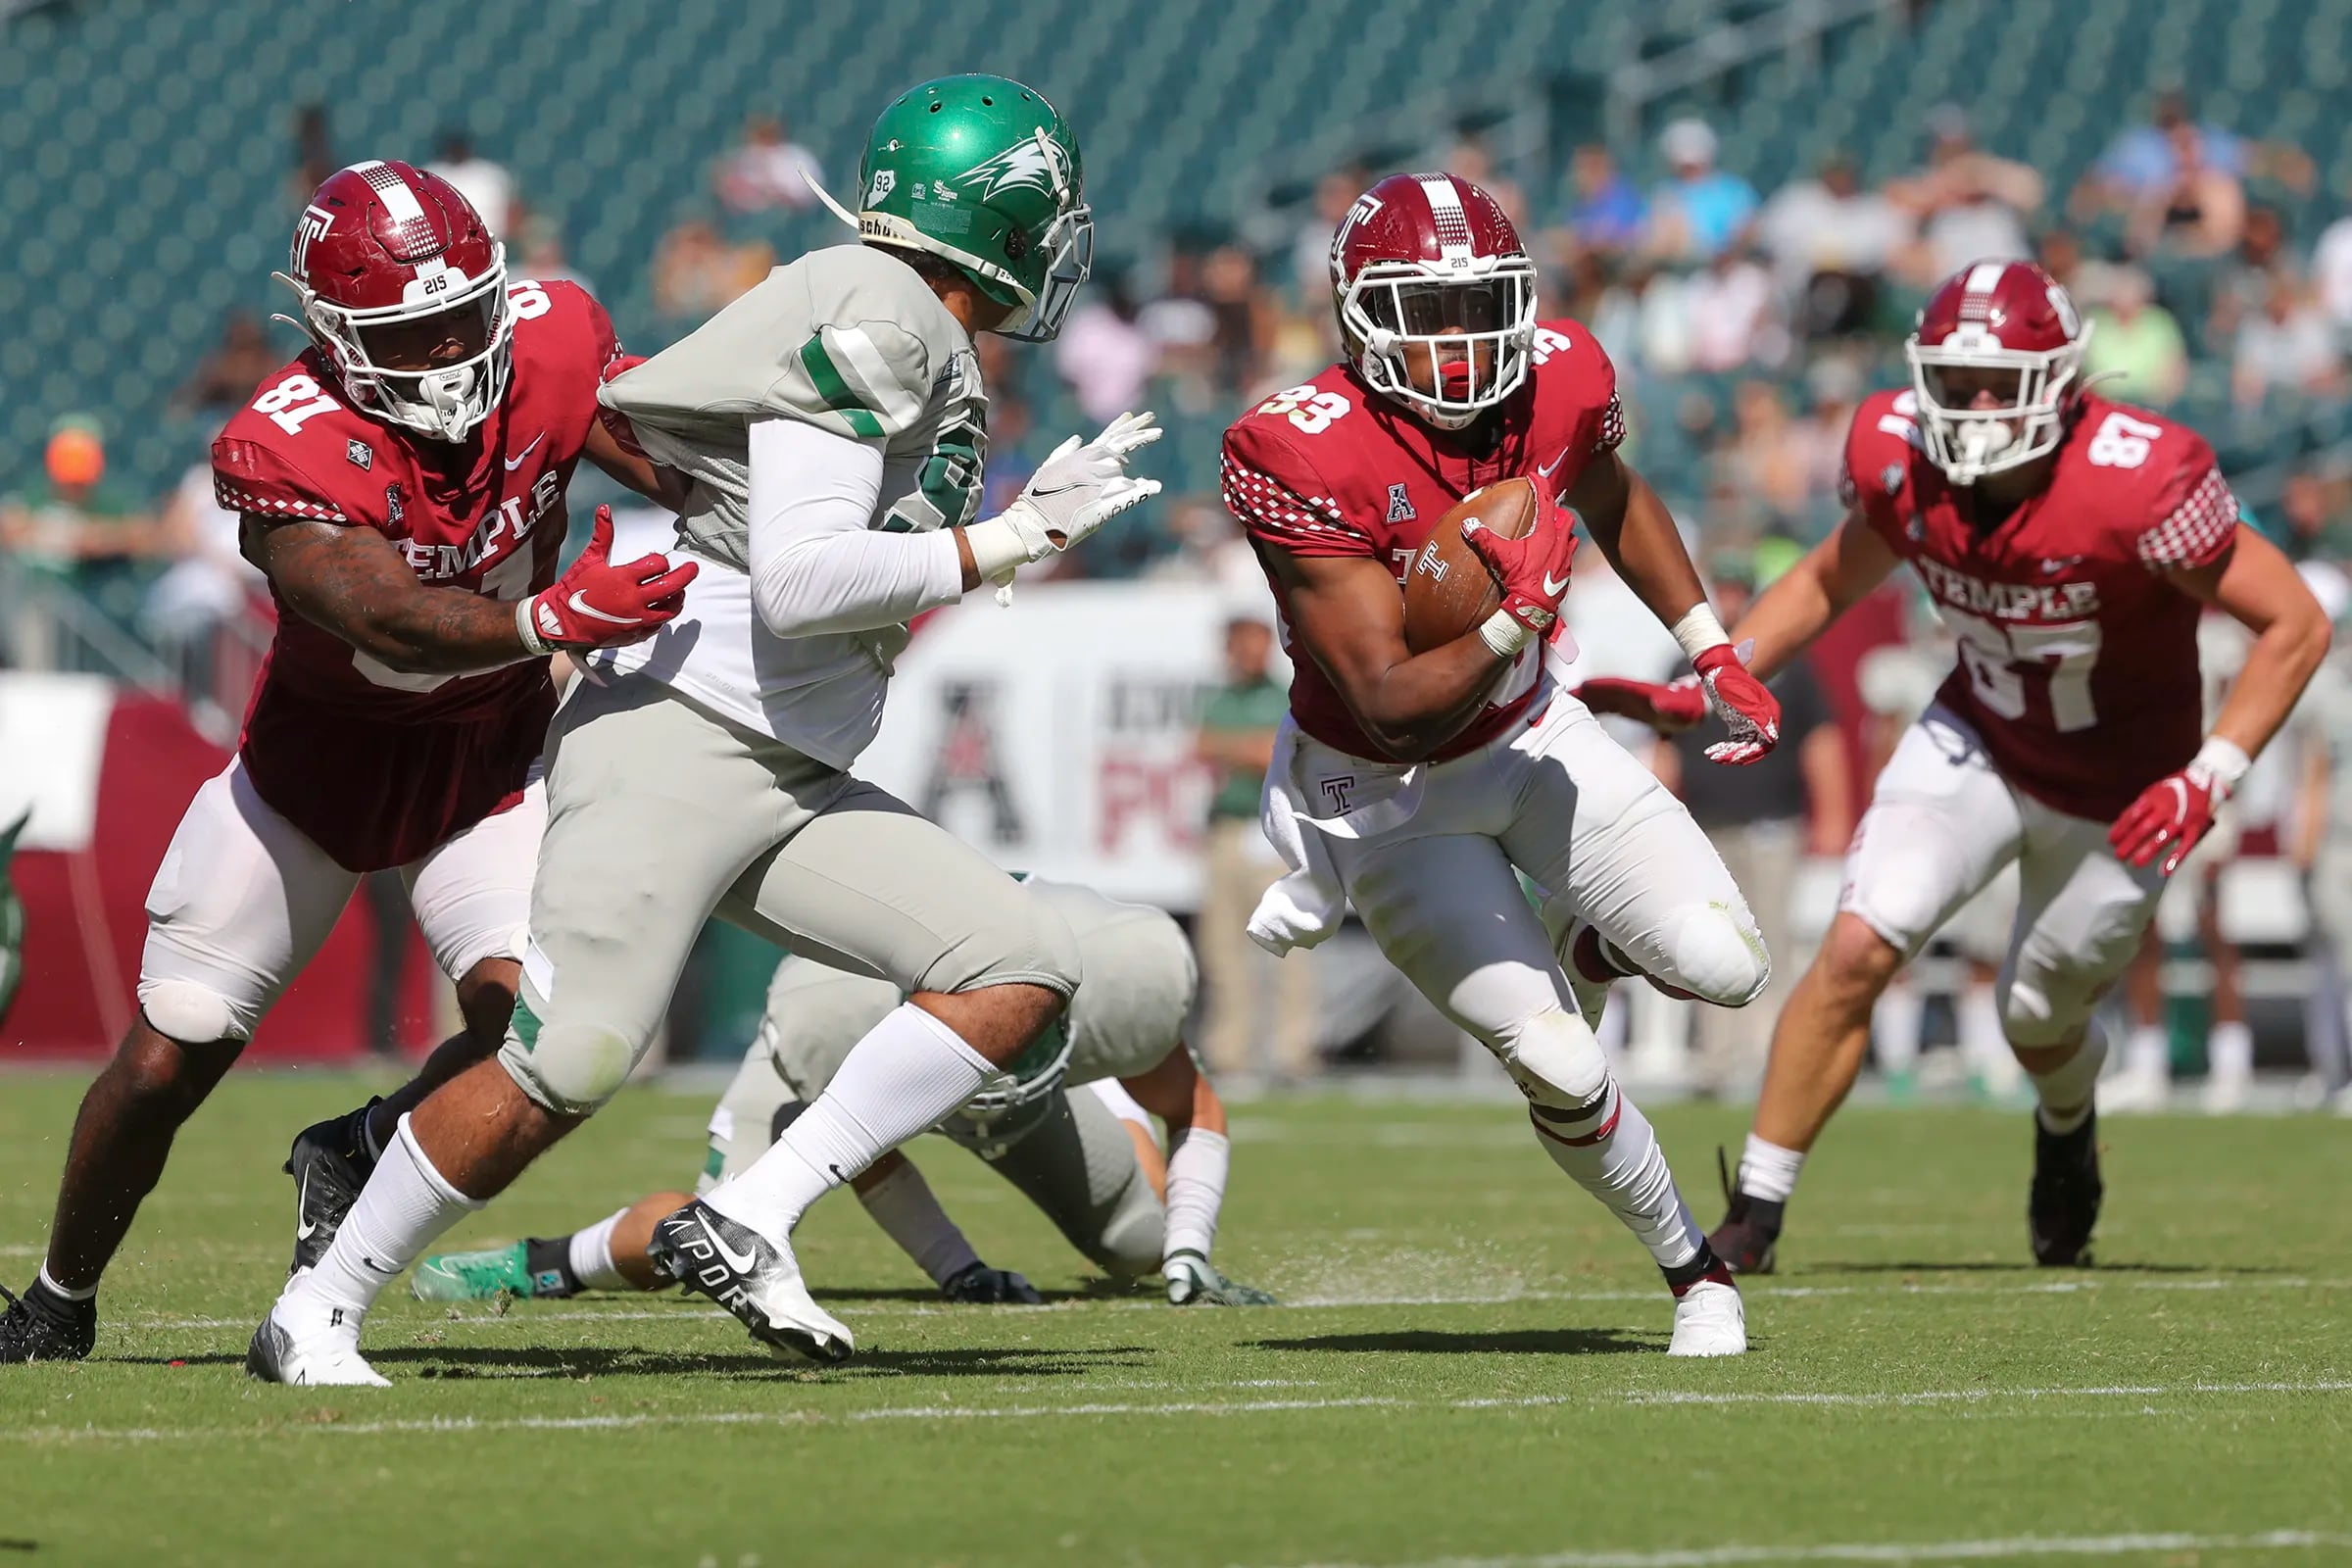 After four years with the program, Temple’s Kyle Dobbins emerges from a crowded backfield - The Philadelphia Inquirer